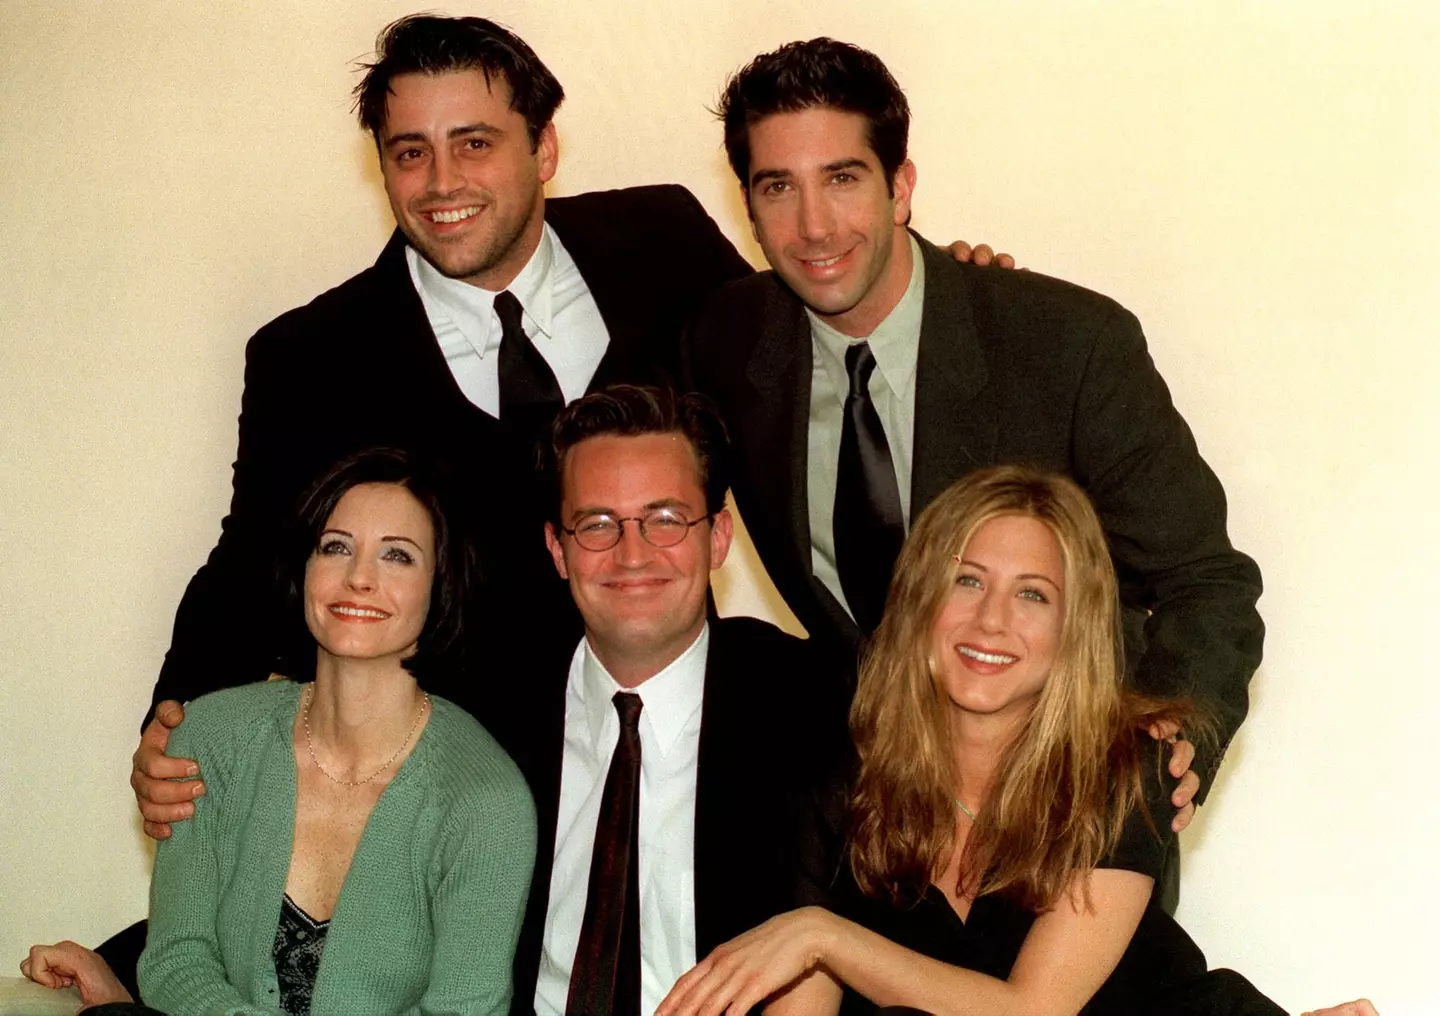 The Friends cast kept things purely...friendly (